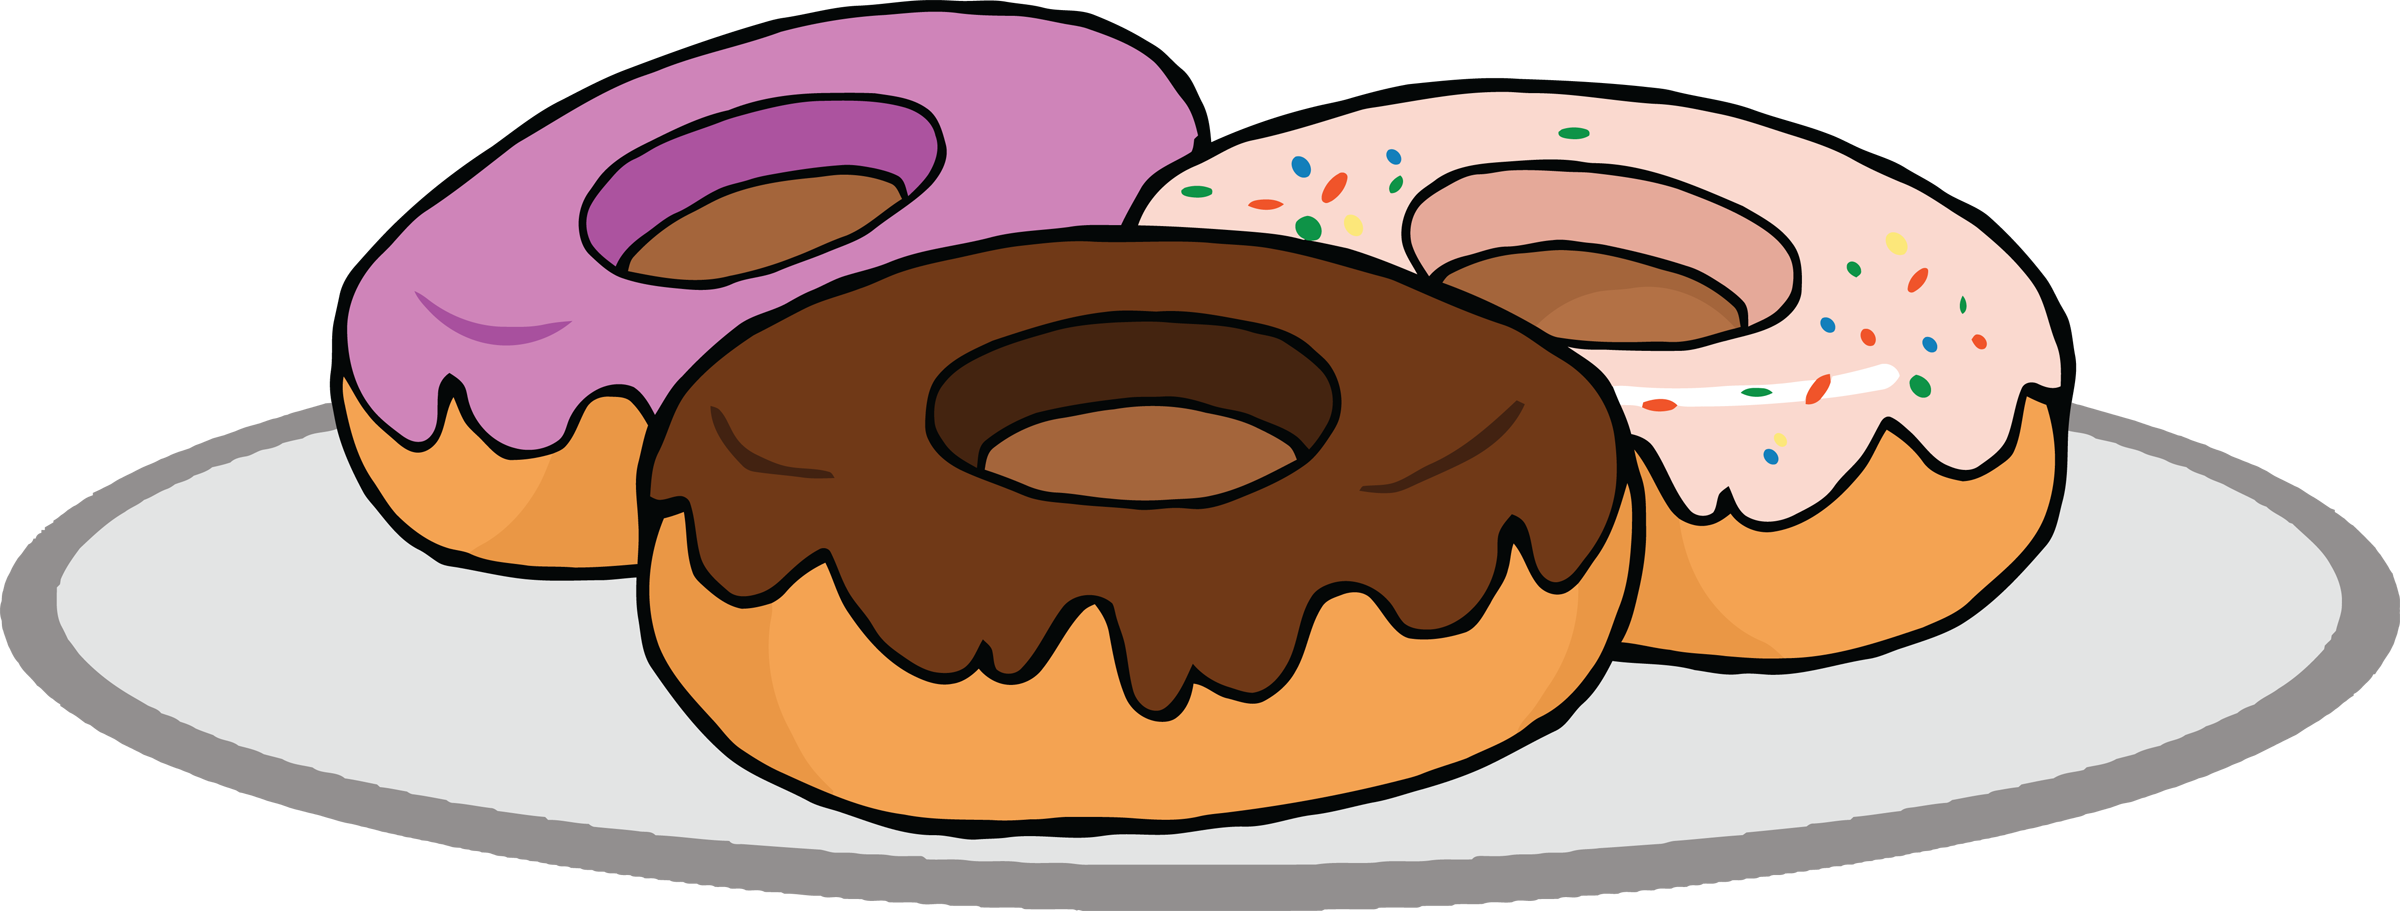 Donuts Pictures Cliparts Co - Clipart Donuts